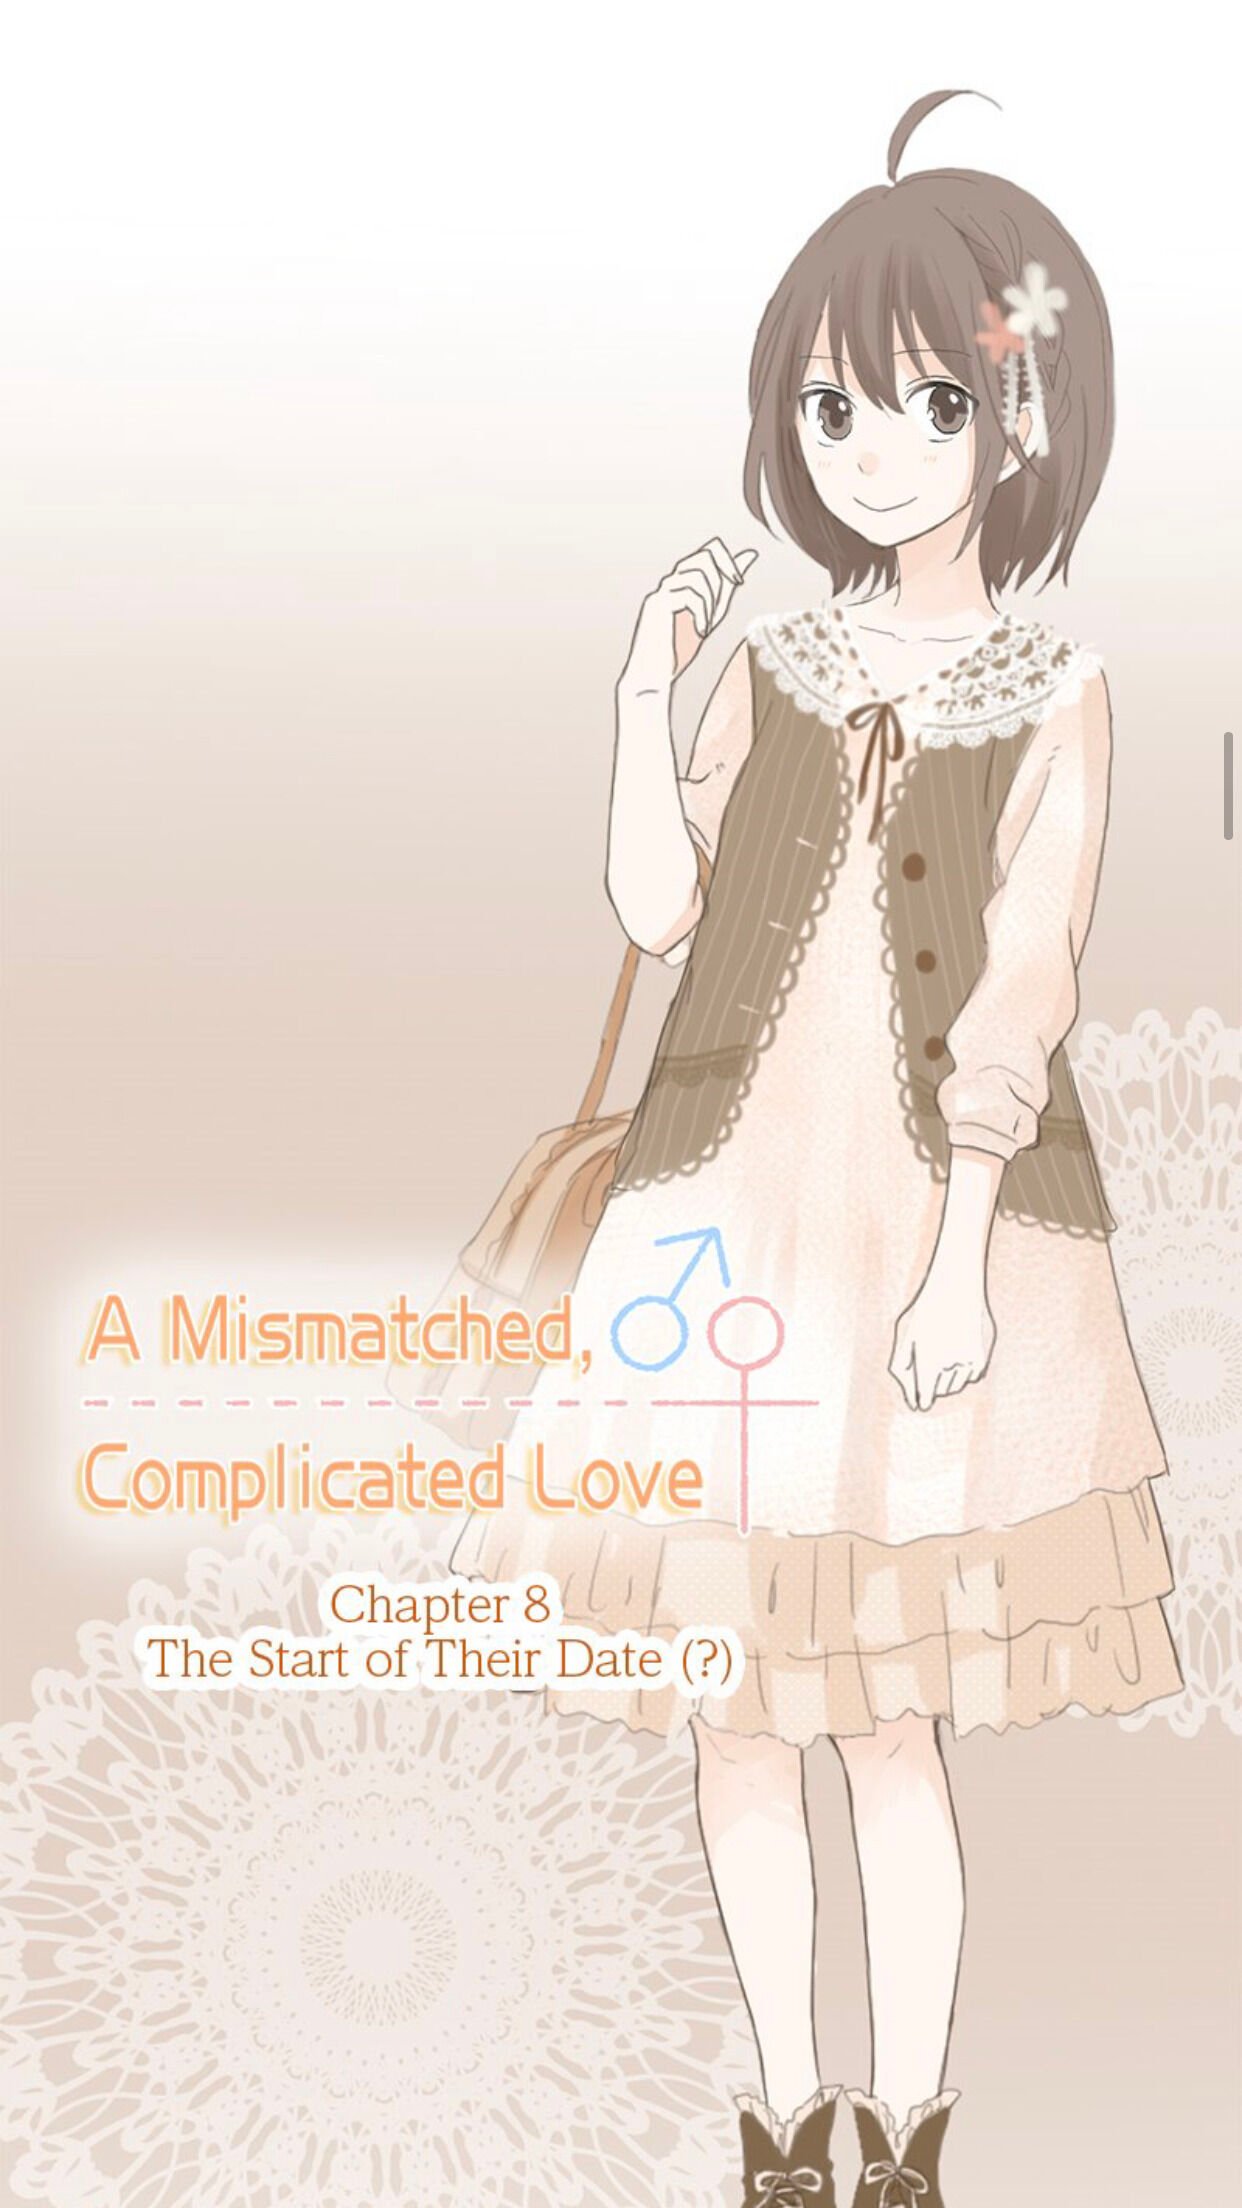 A Mismatched Complicated Love chapter 8